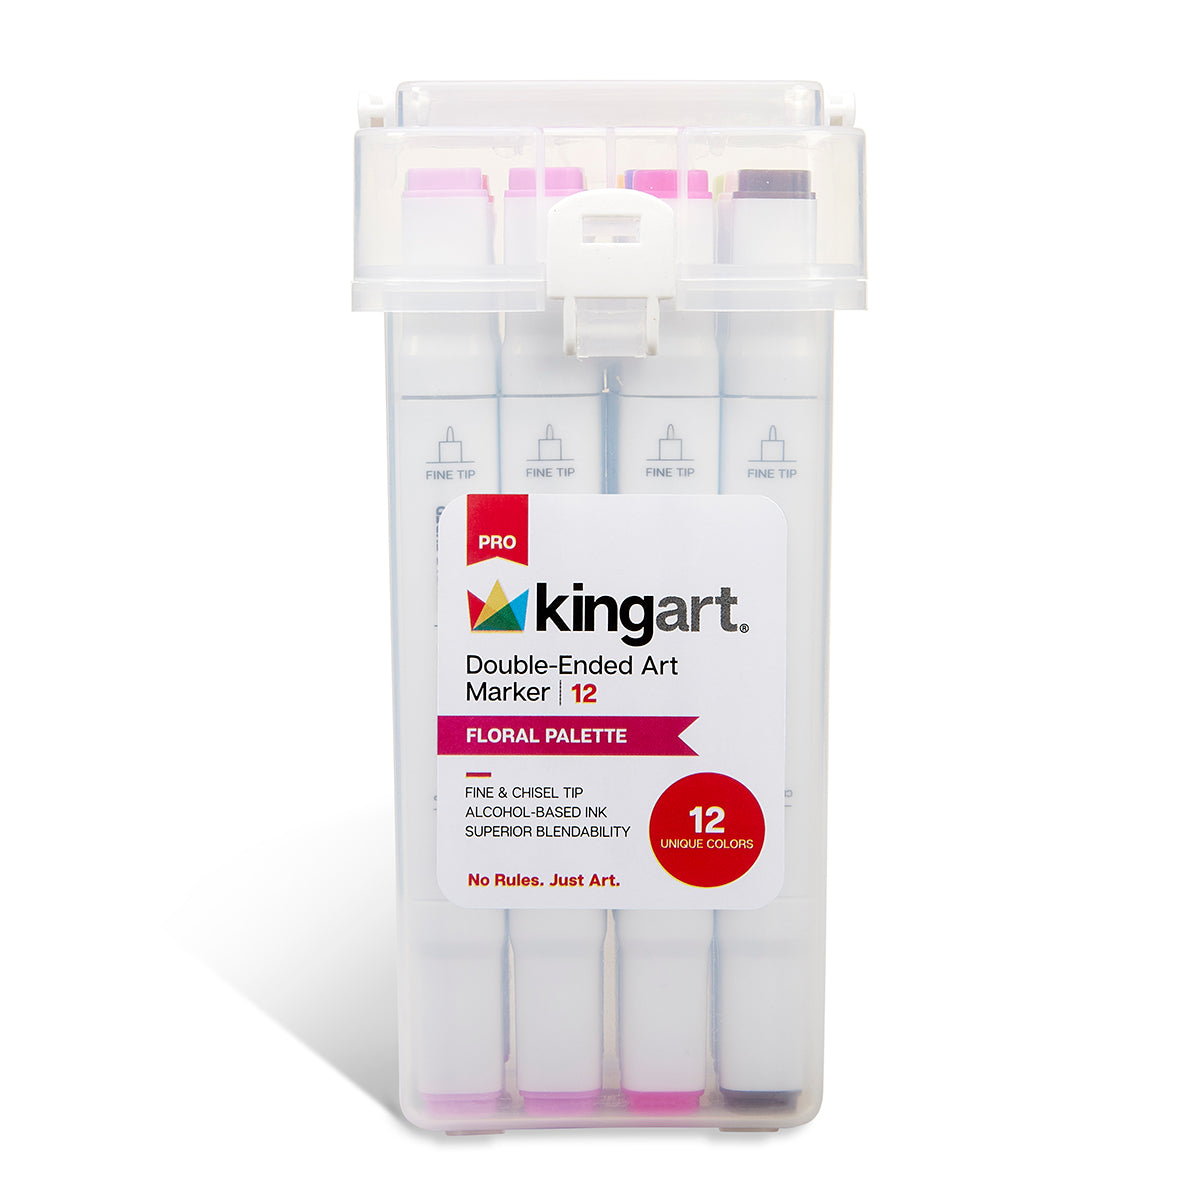 Let's Review the KingArt Pro Markers 